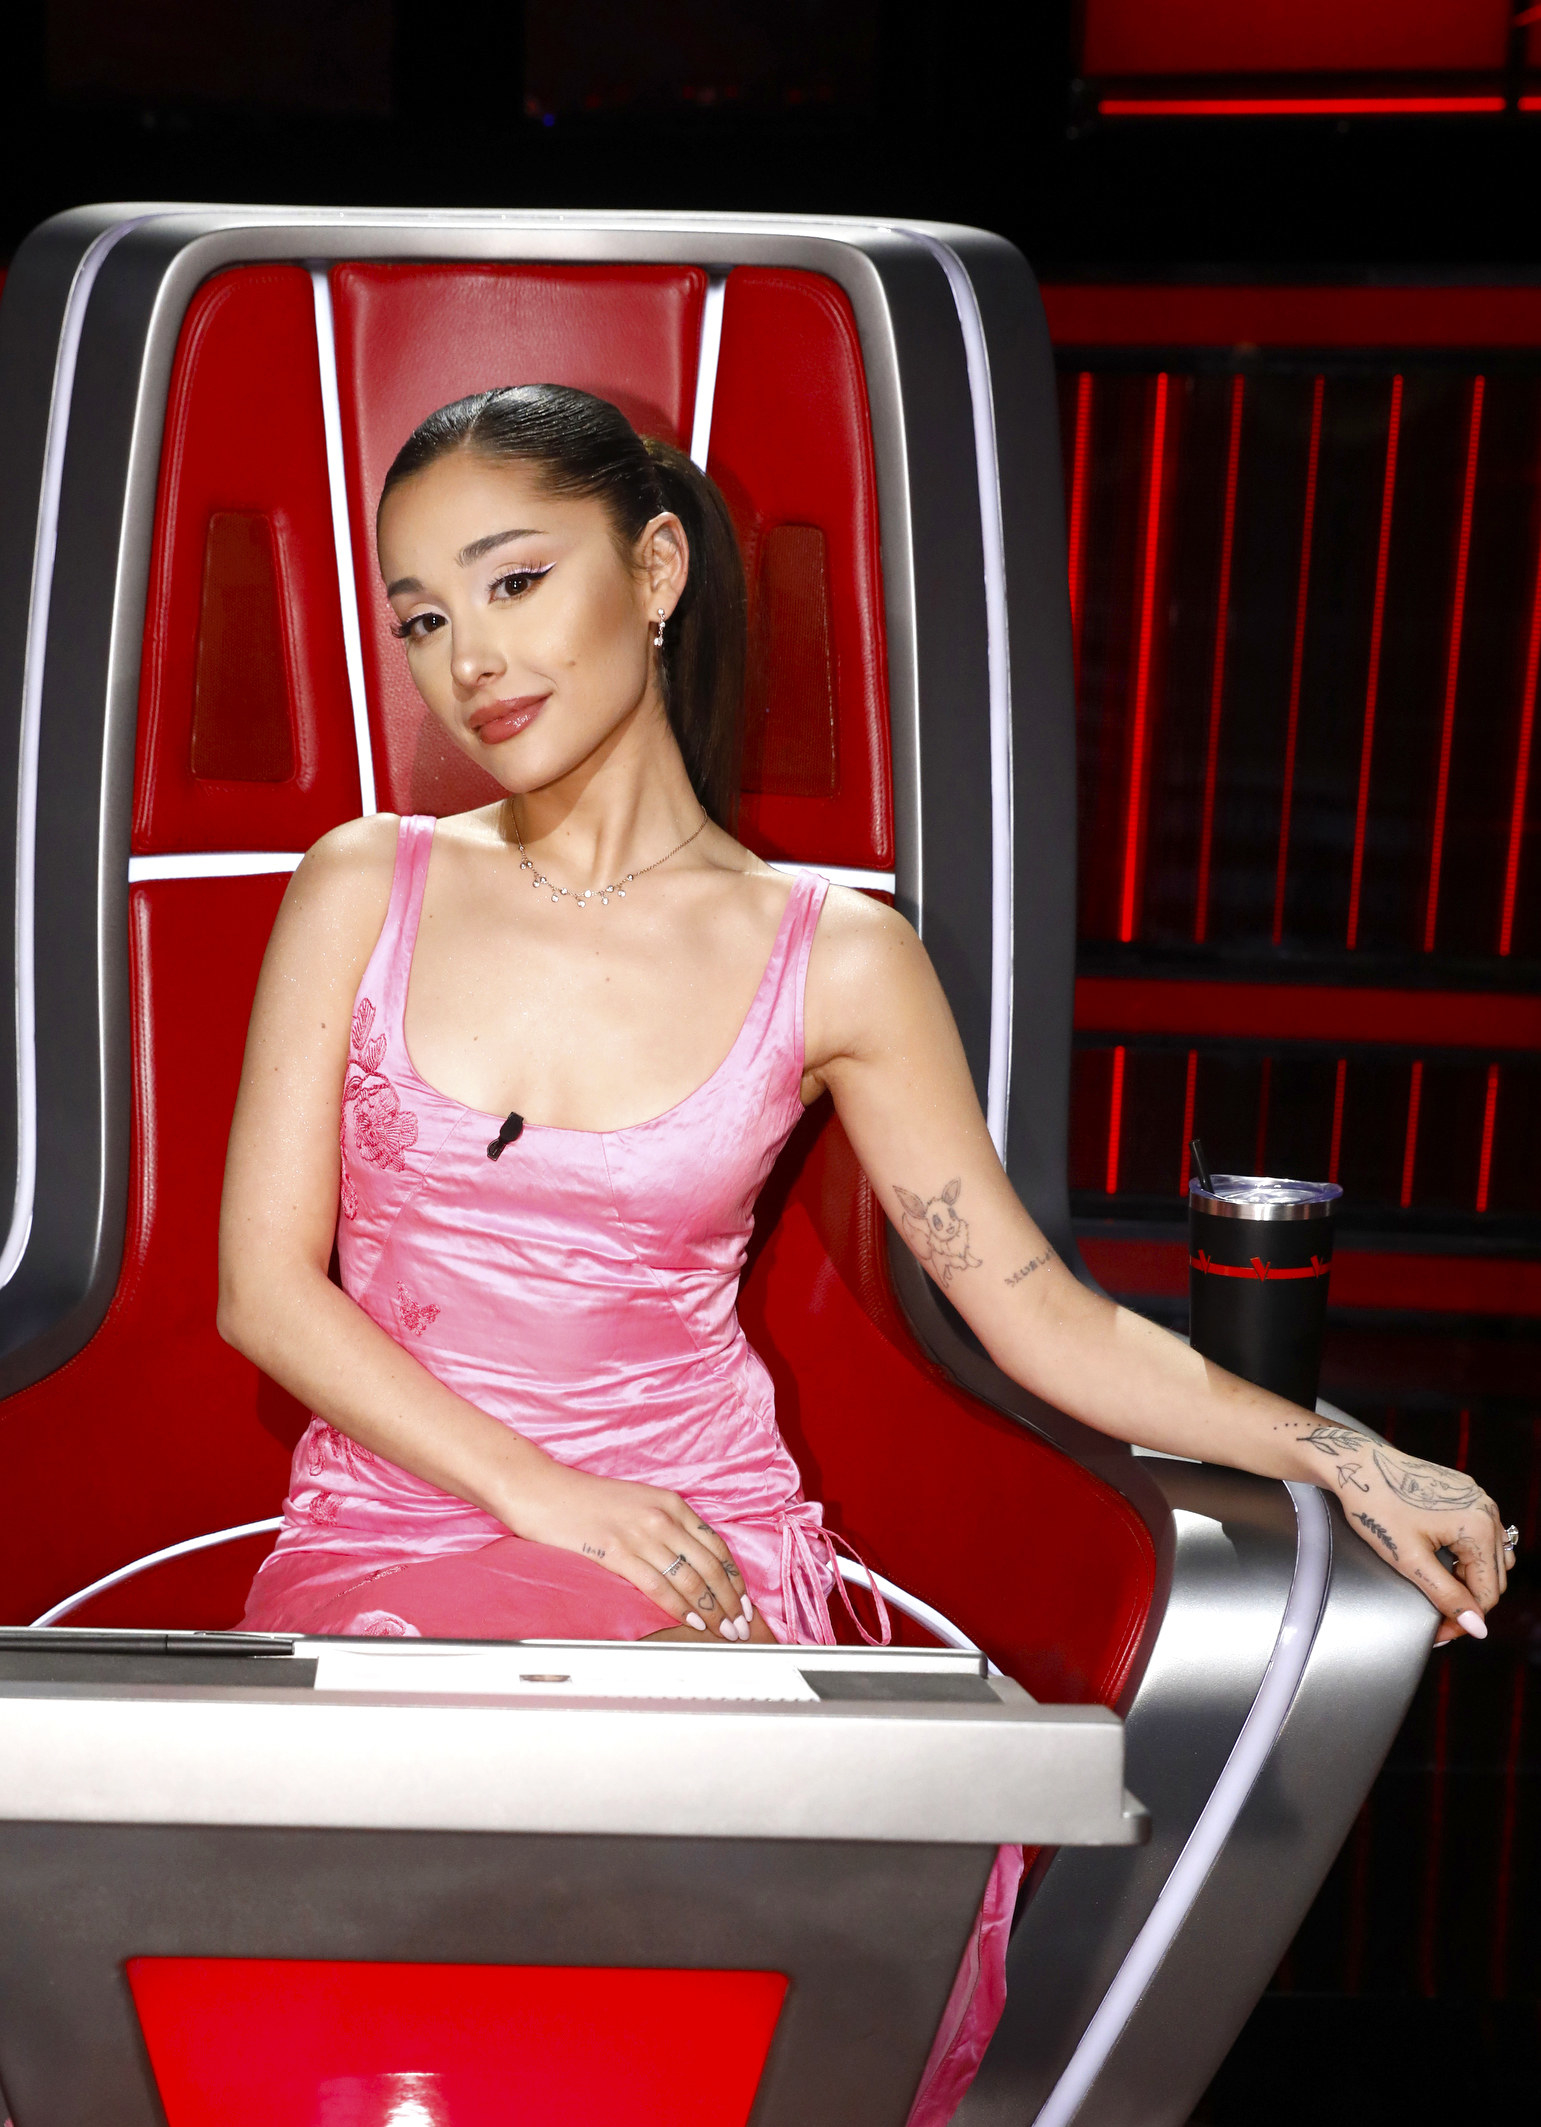 Ariana Grande on The Voice